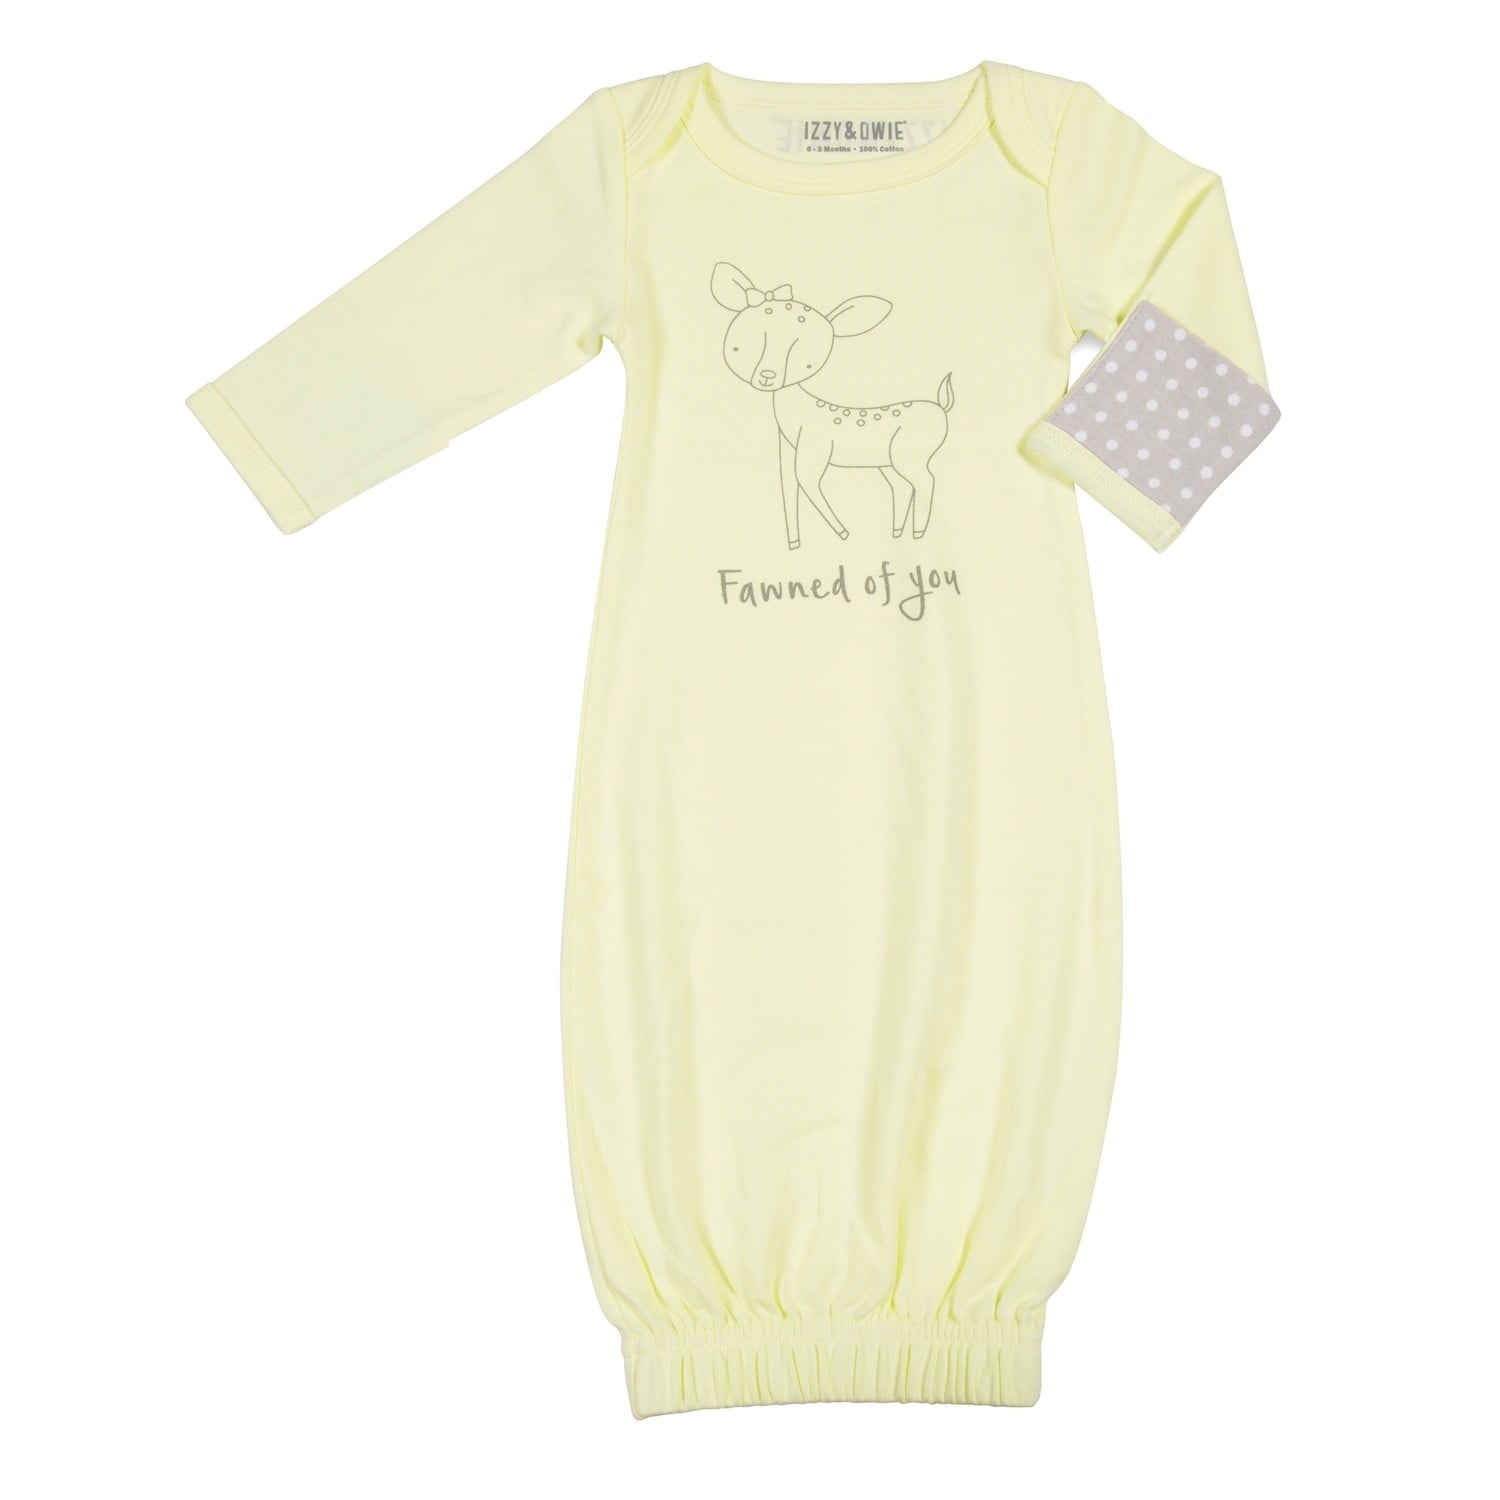 soft baby gowns